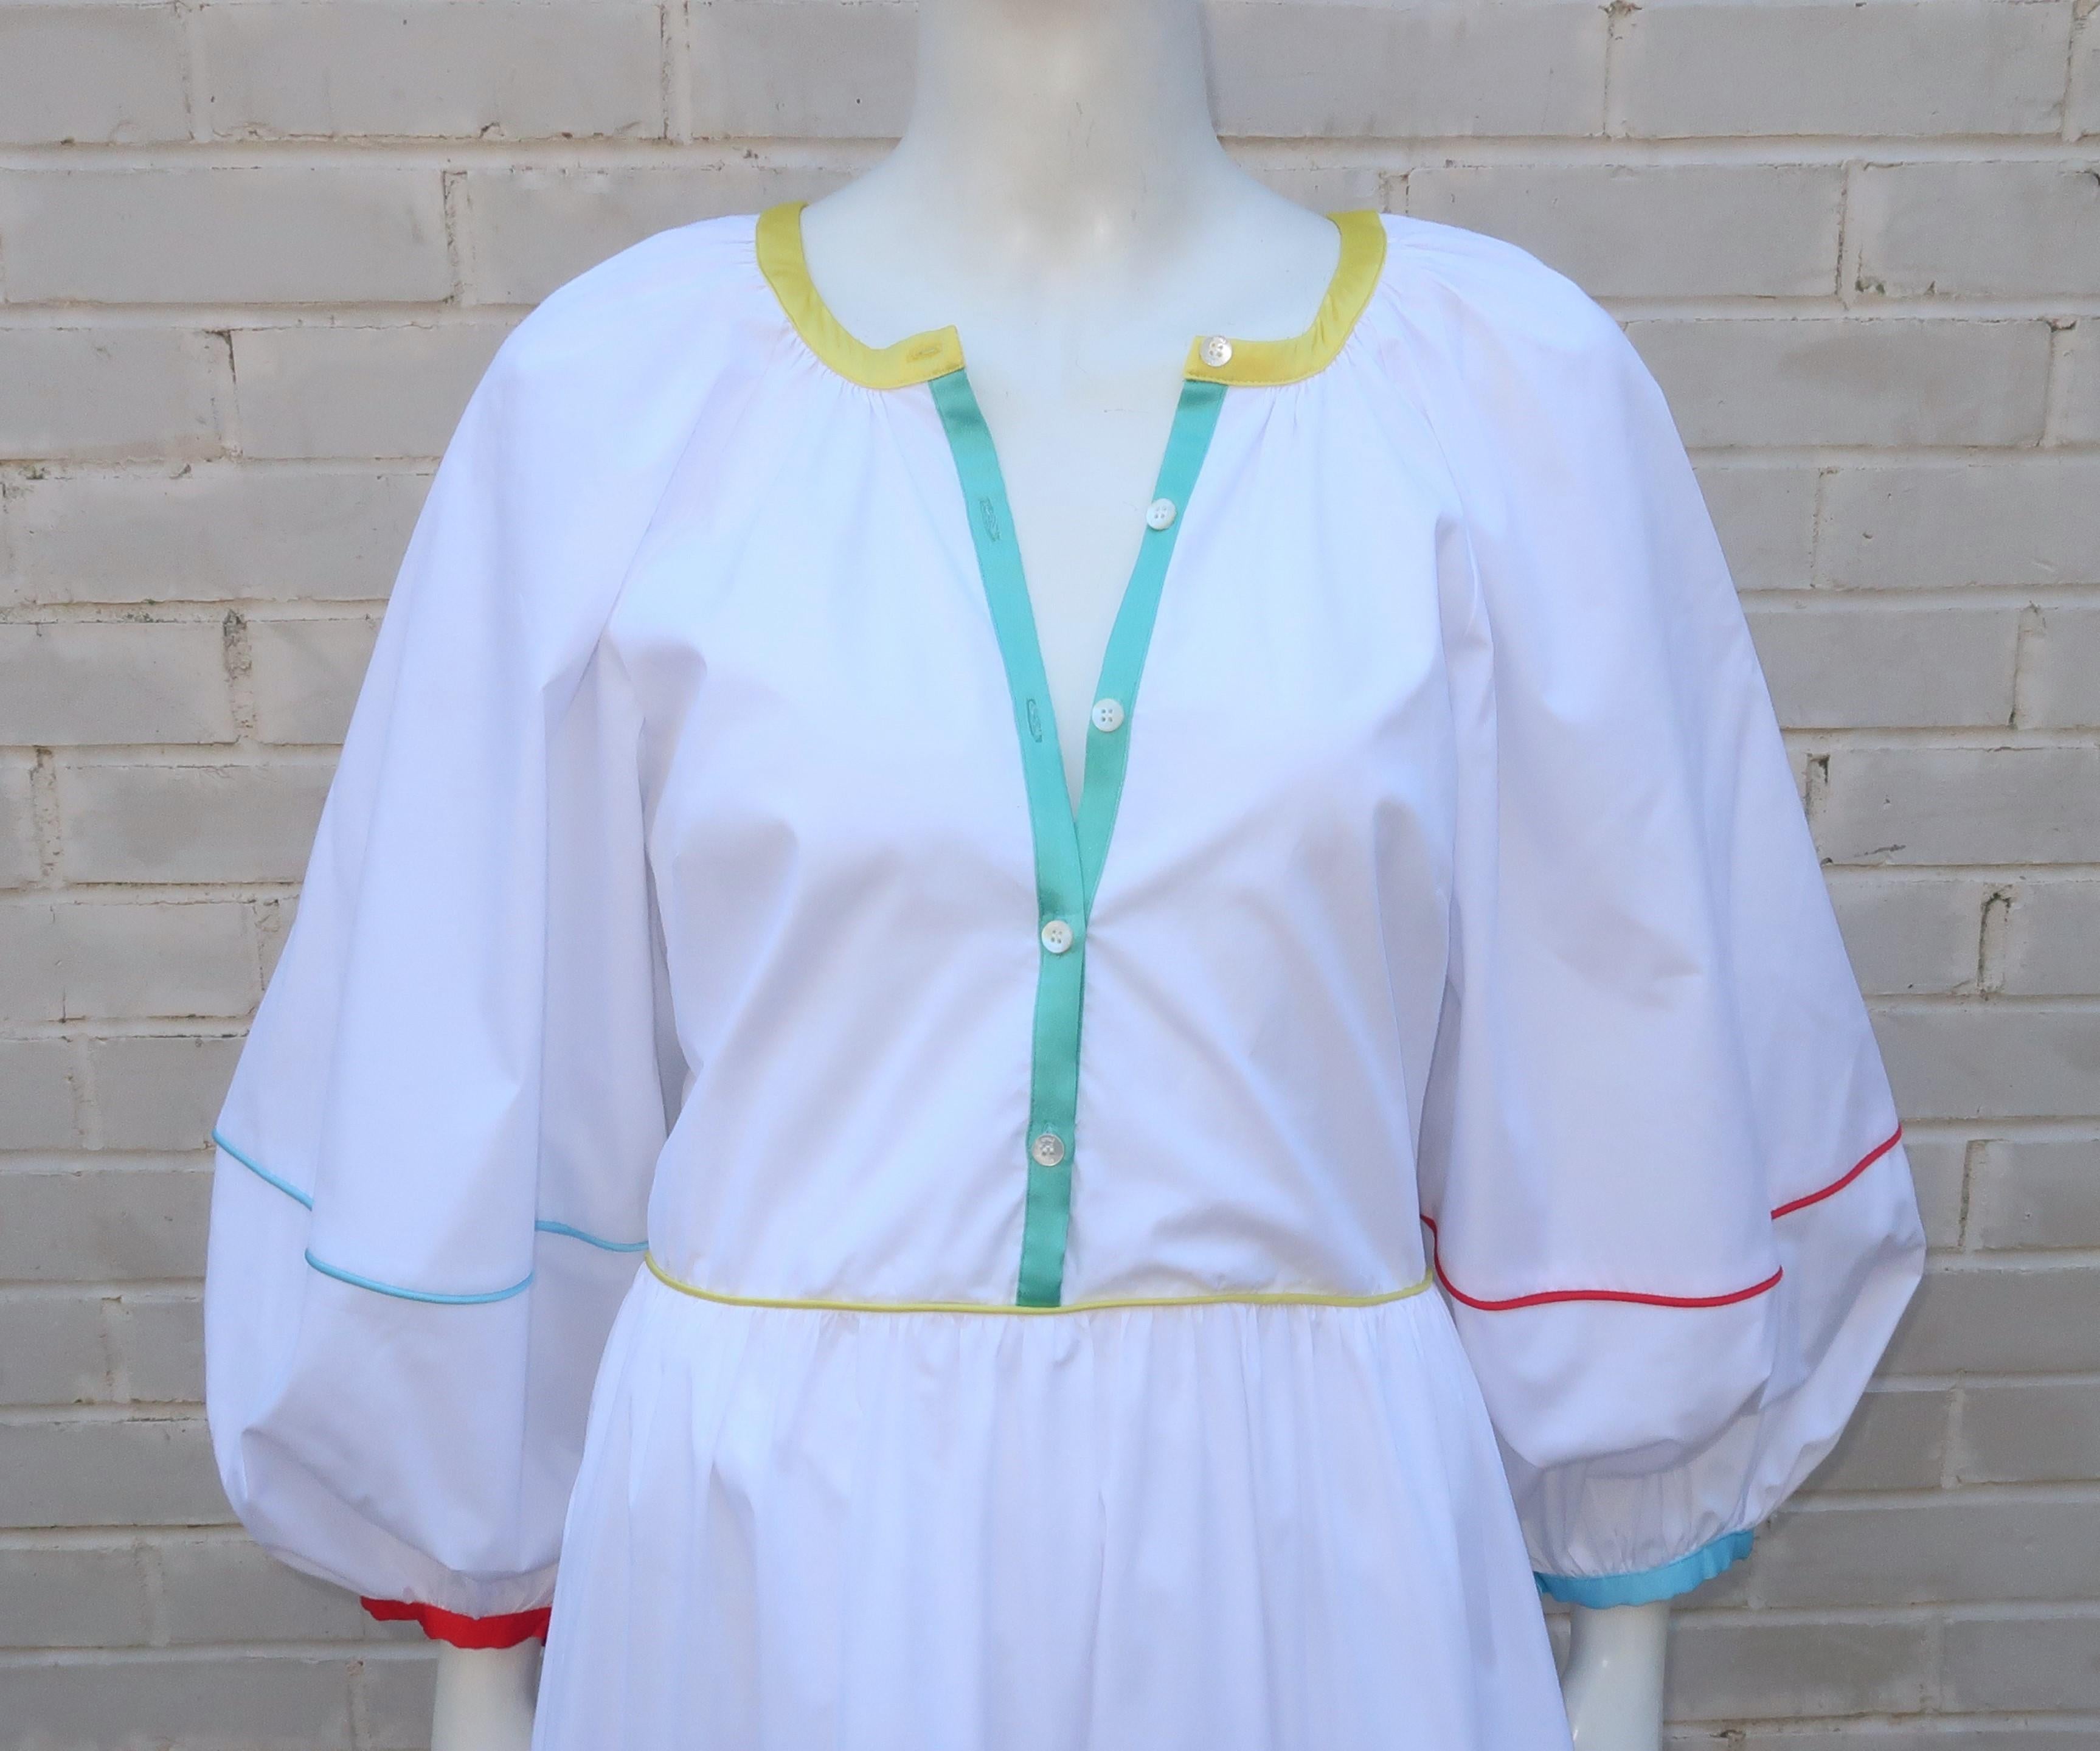 A flowing crisp white cotton maxi dress by Los Angeles based clothing company, Staud.  The dress has a vintage inspired peasant style with balloon sleeves and tiers accented by colorful satin cording including shades of yellow, orangey red, baby